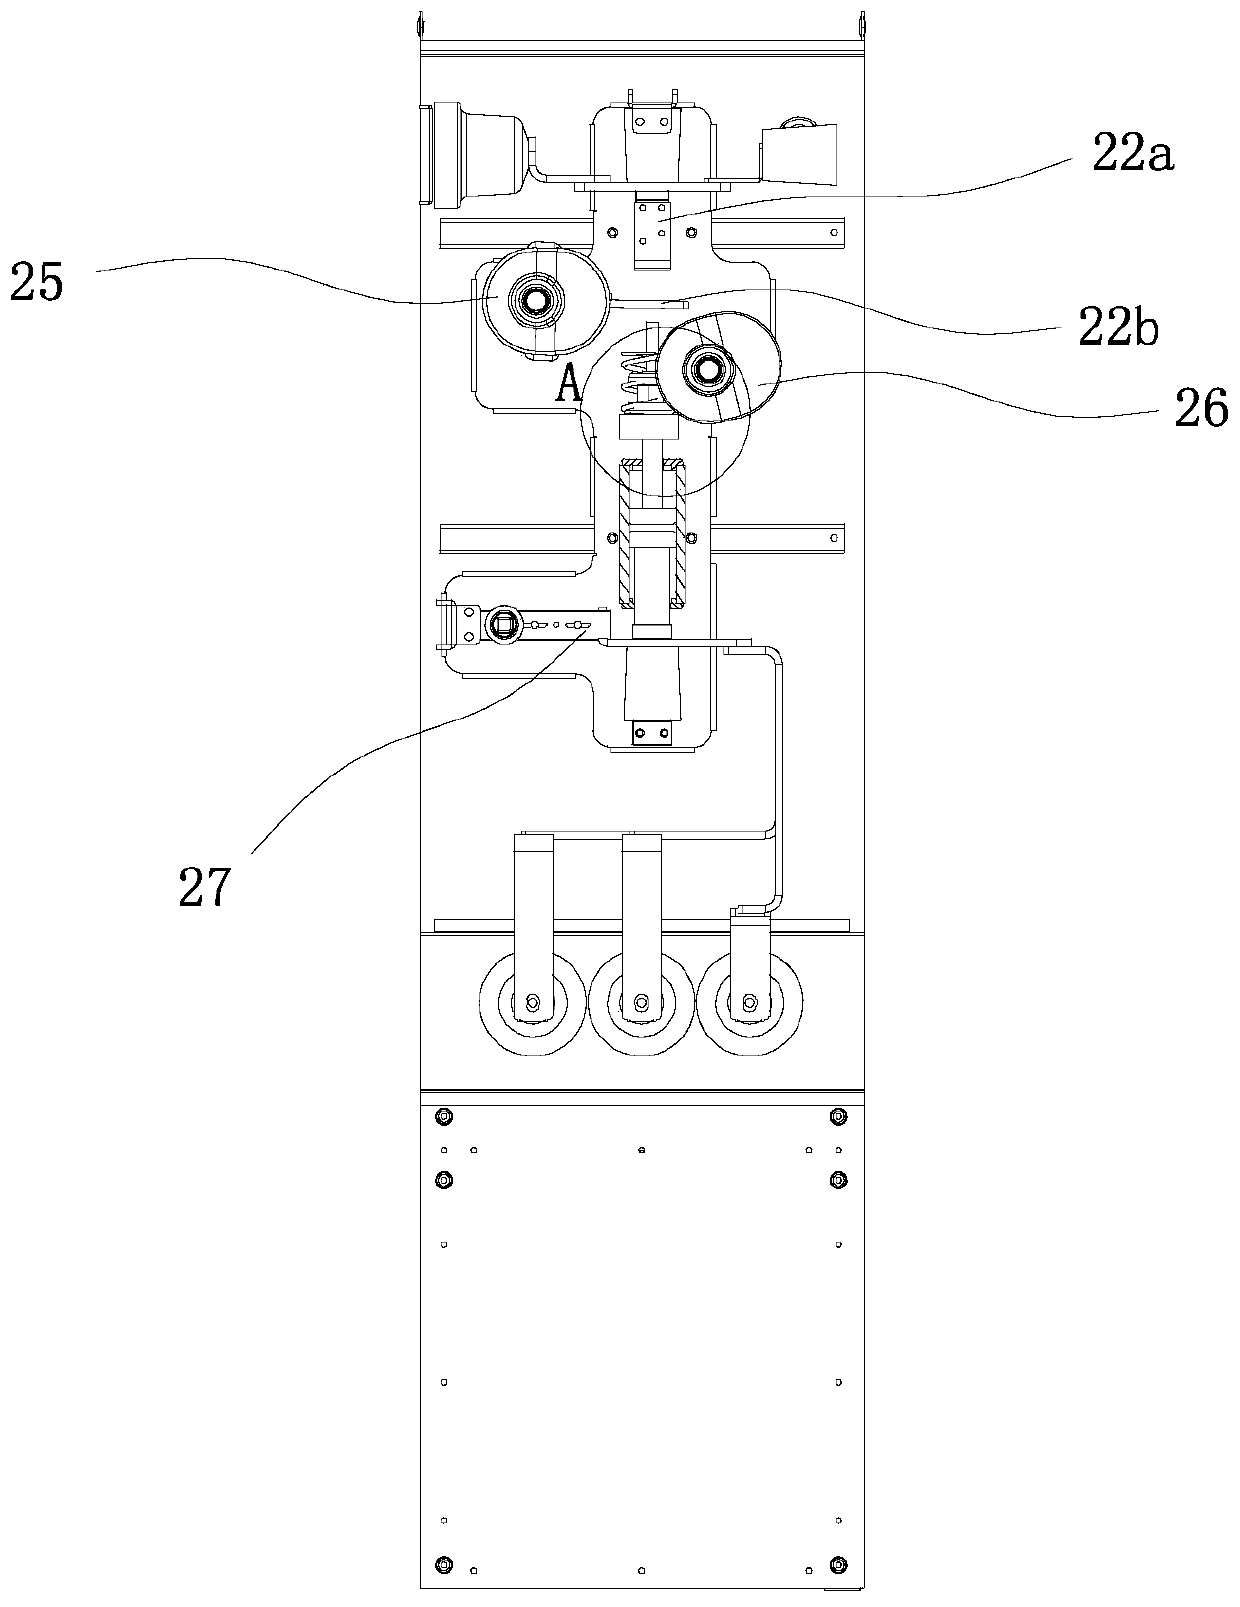 A breaking method for isolation linkage vacuum load switch